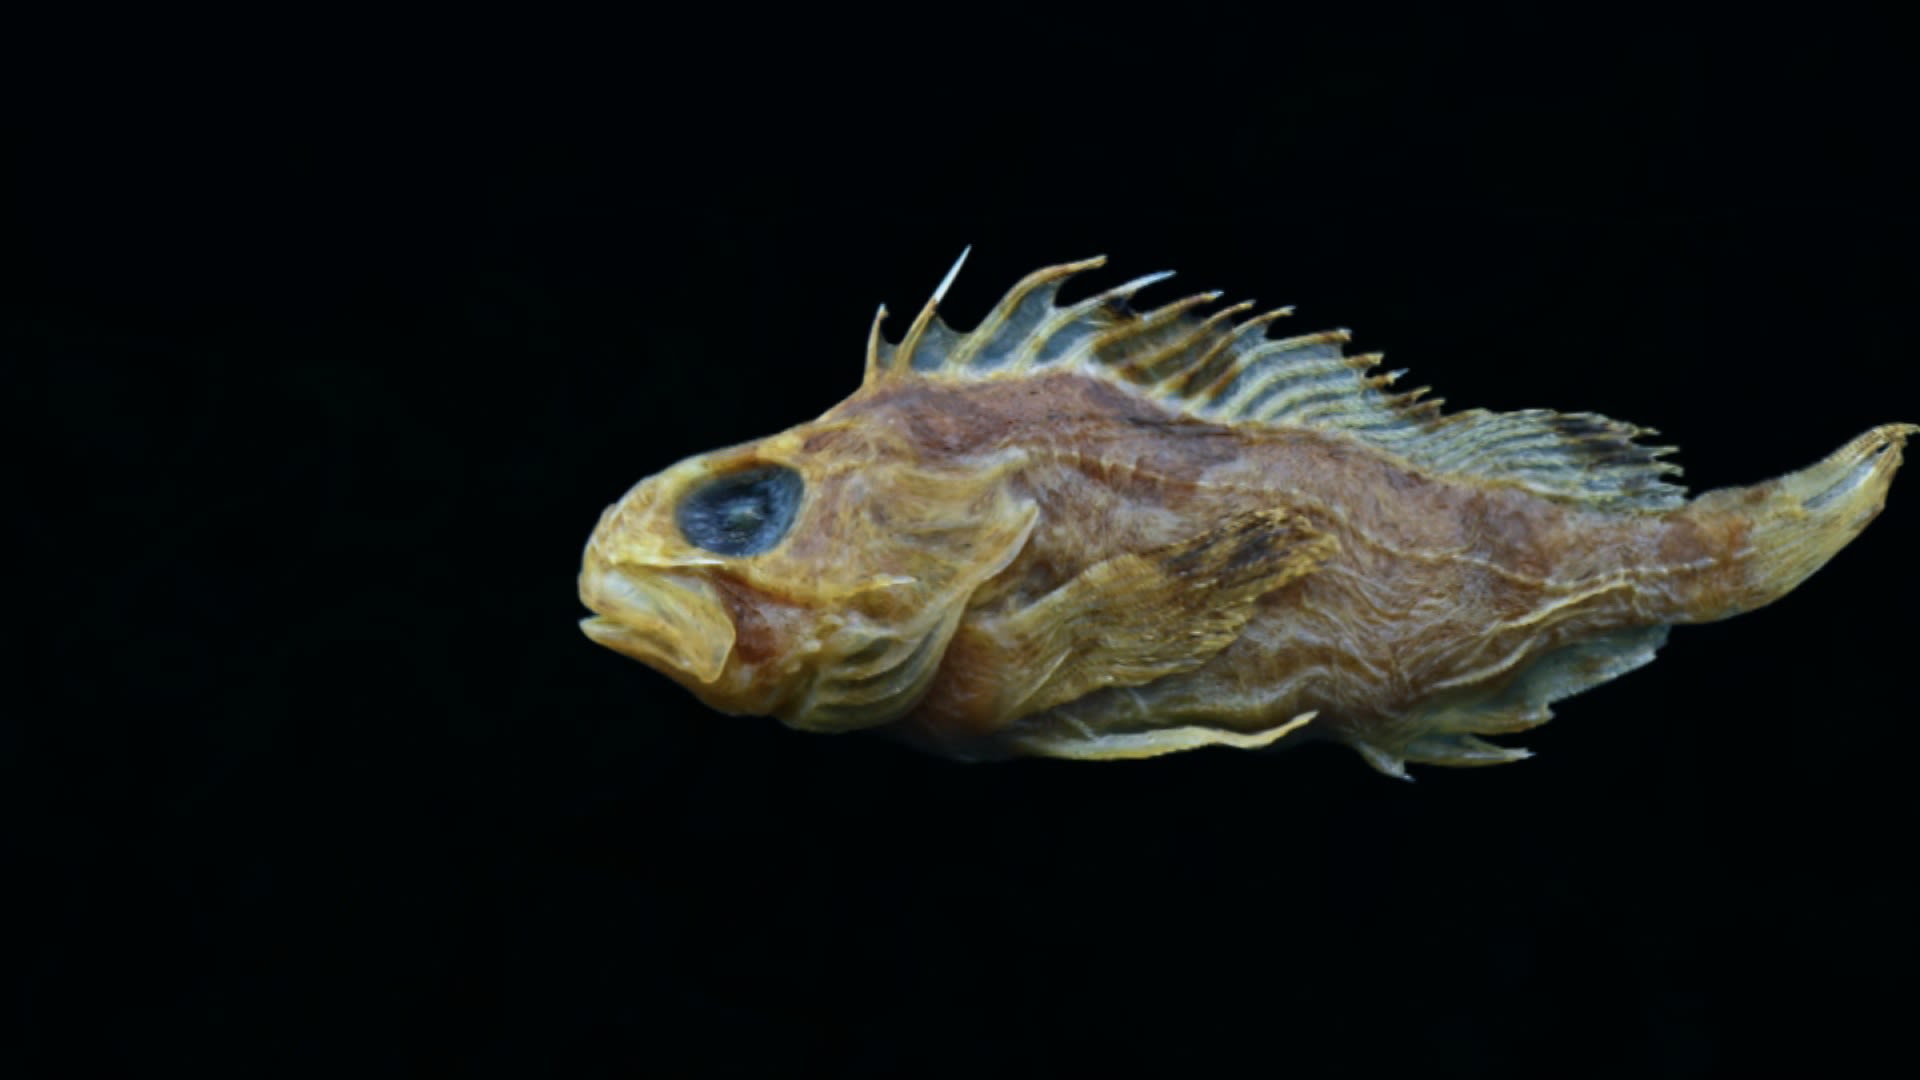 Stonefish are scary enough, but now scientists have discovered